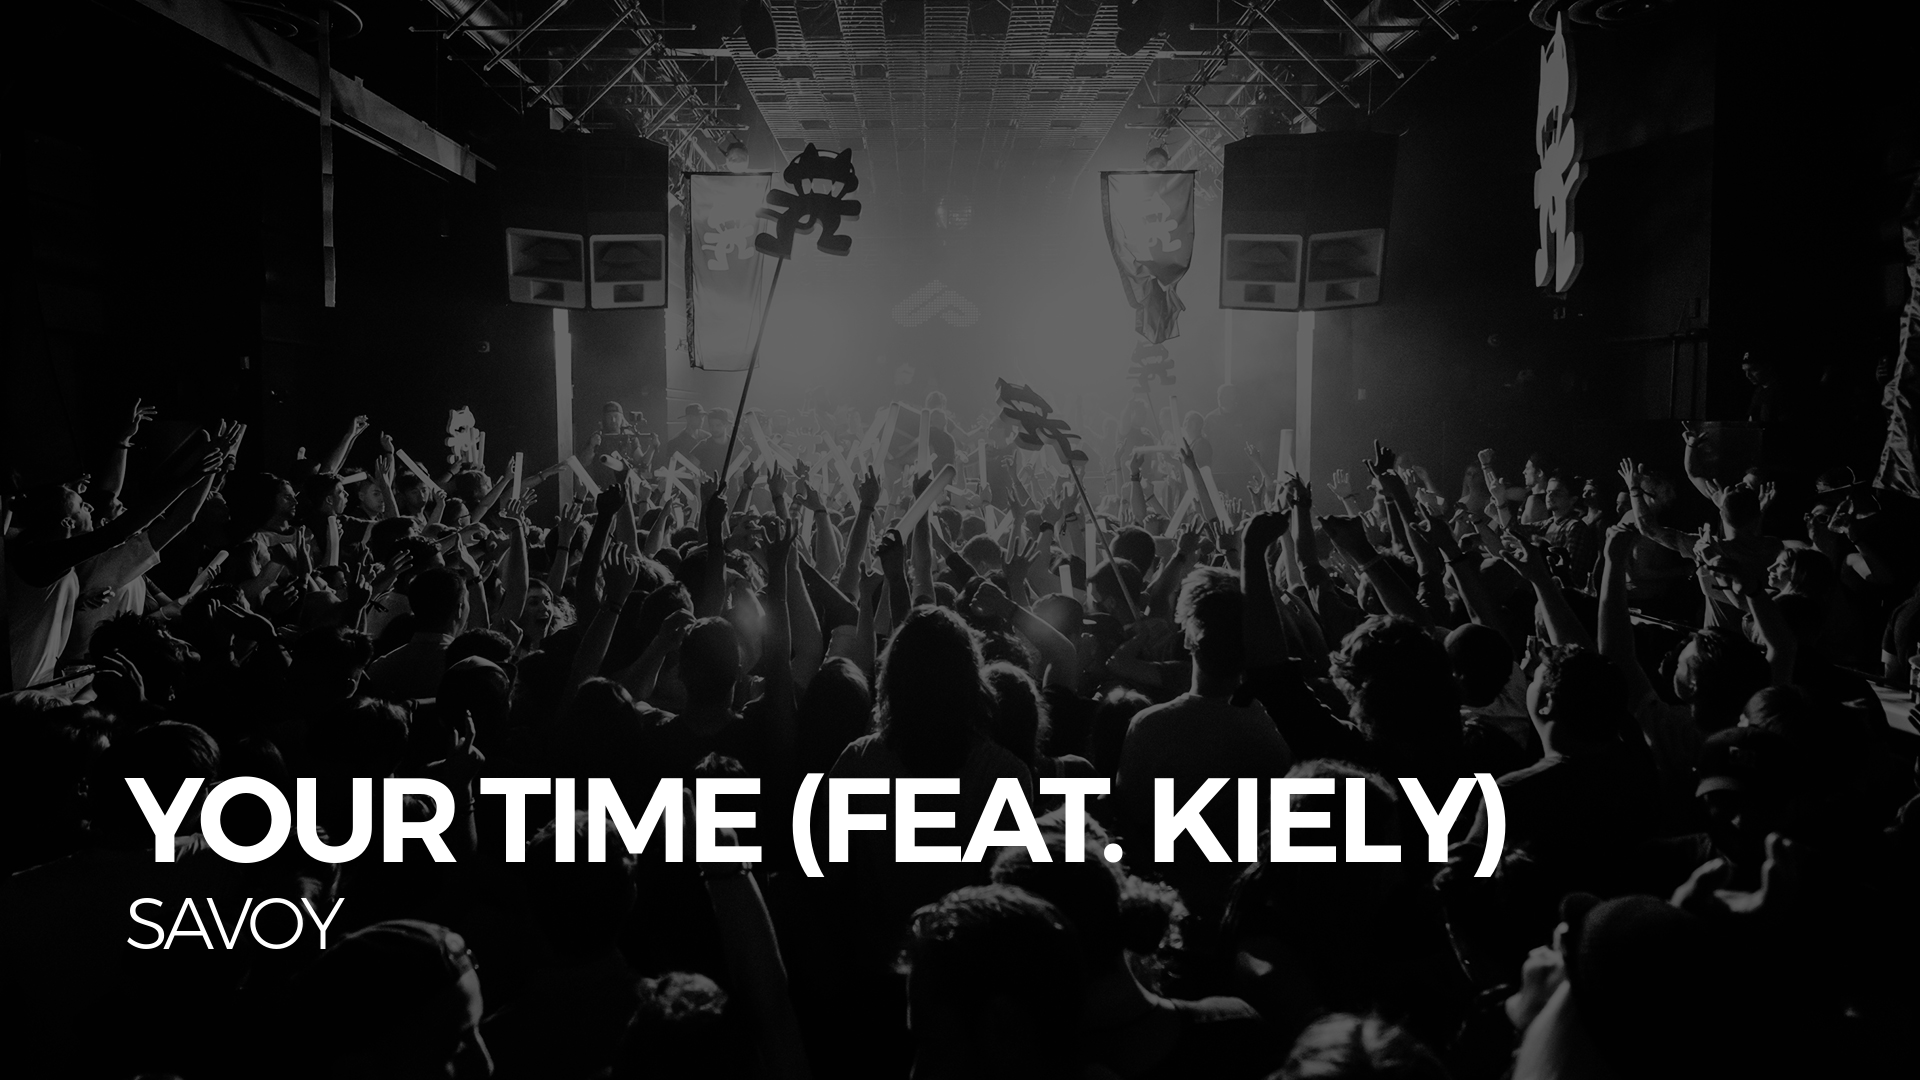 [Dubstep] - Savoy - Your Time (feat. KIELY) [Monstercat EP Release]